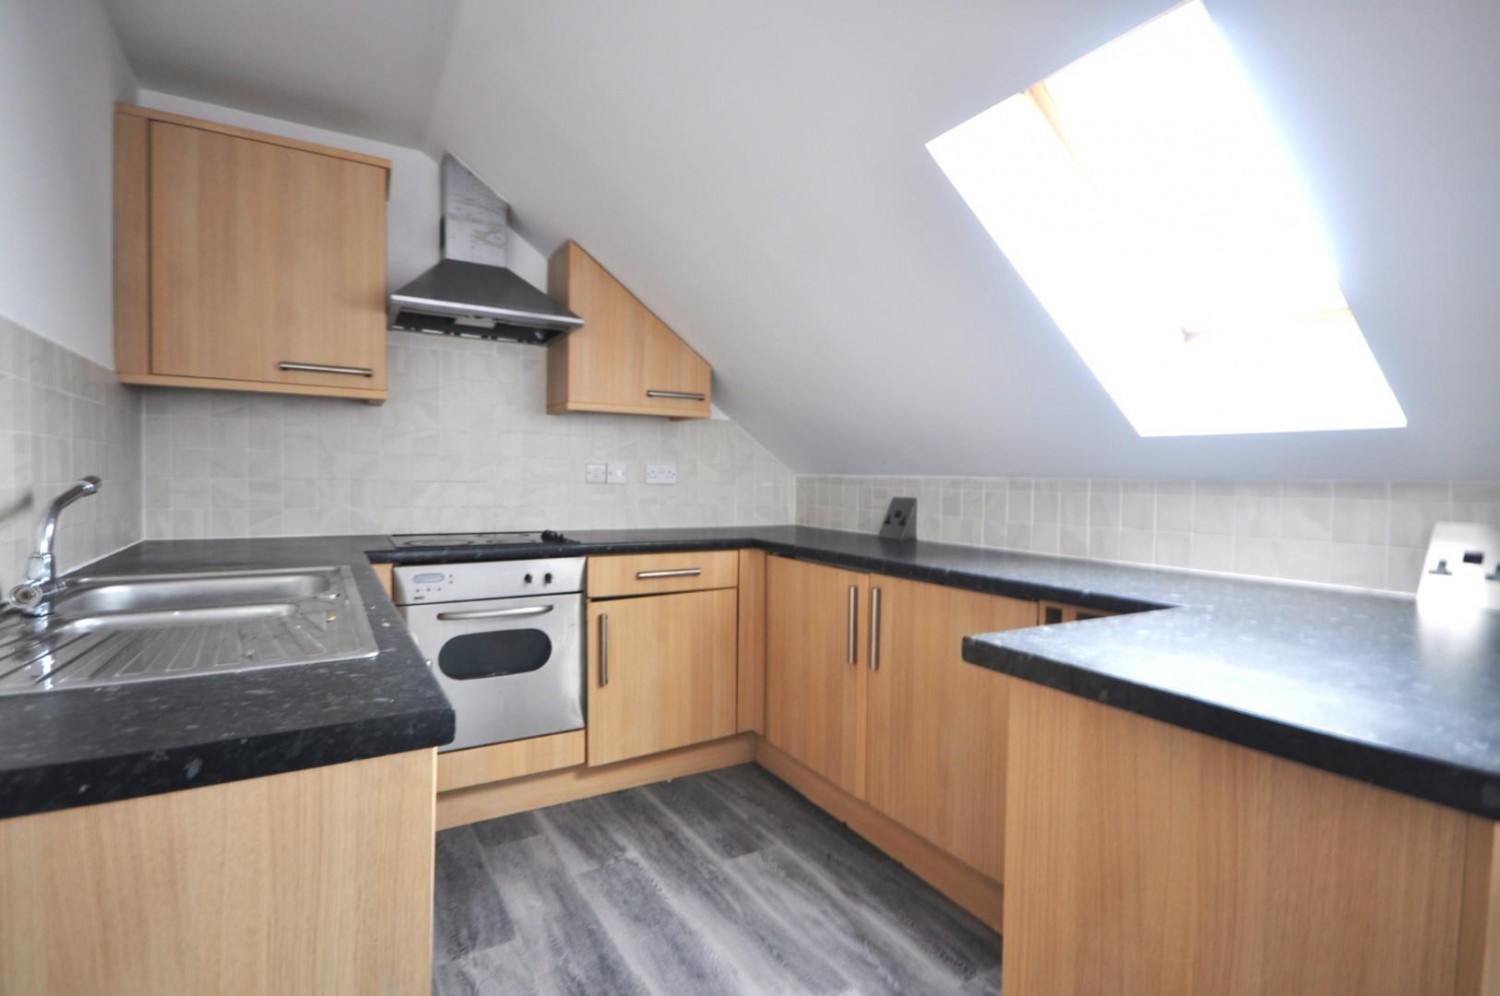 Acland Road, Exeter, , EX4 6PP